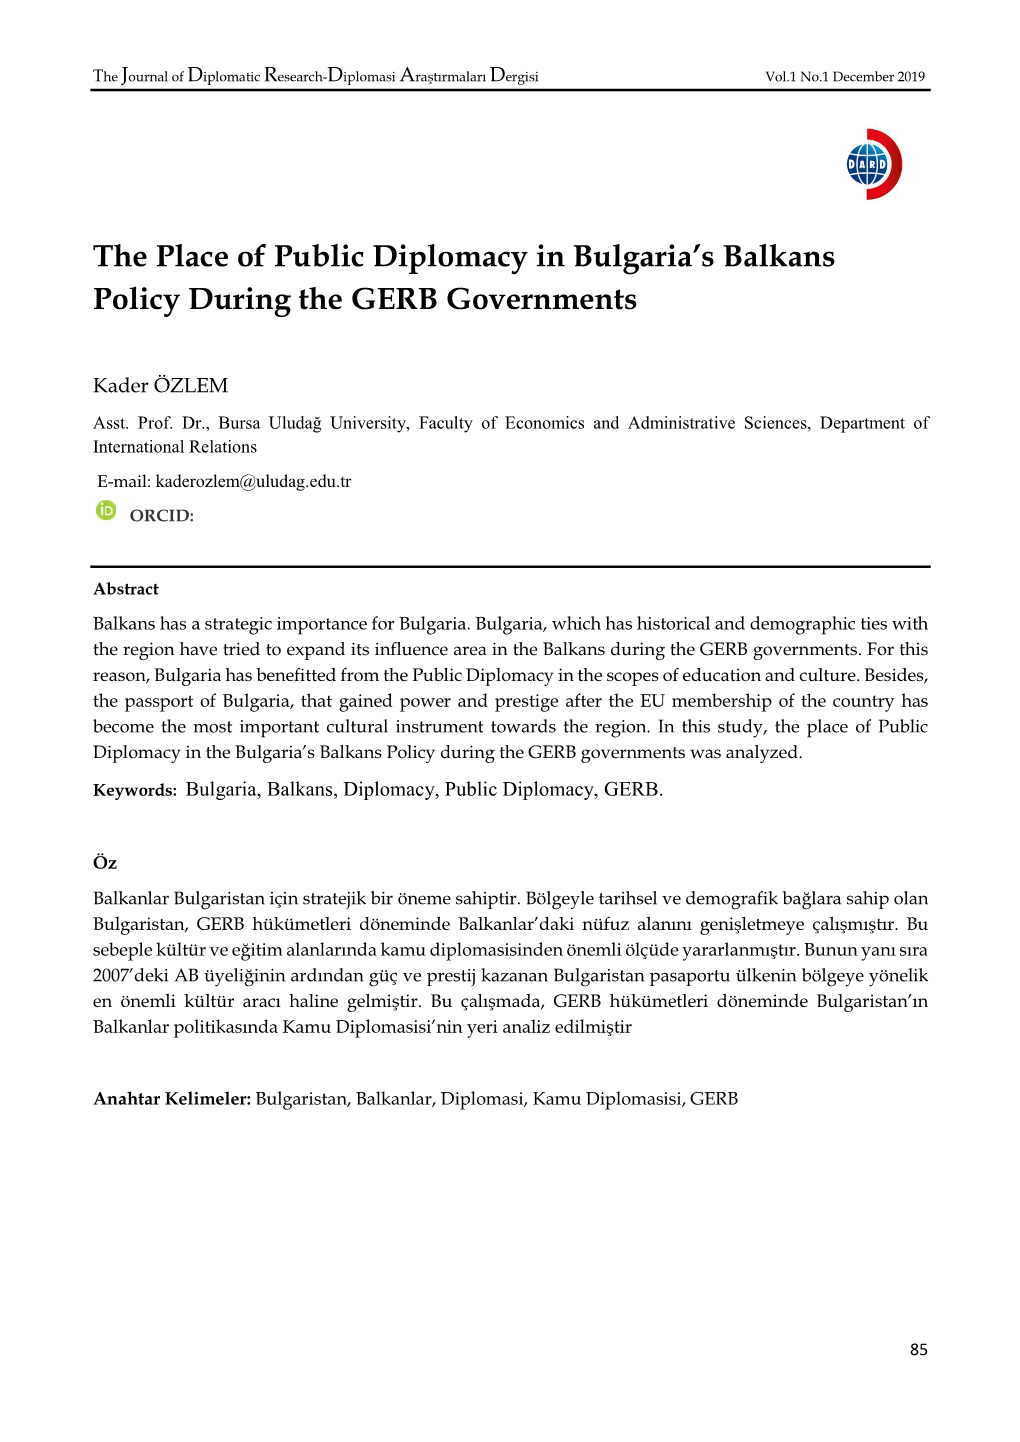 The Place of Public Diplomacy in Bulgaria's Balkans Policy During